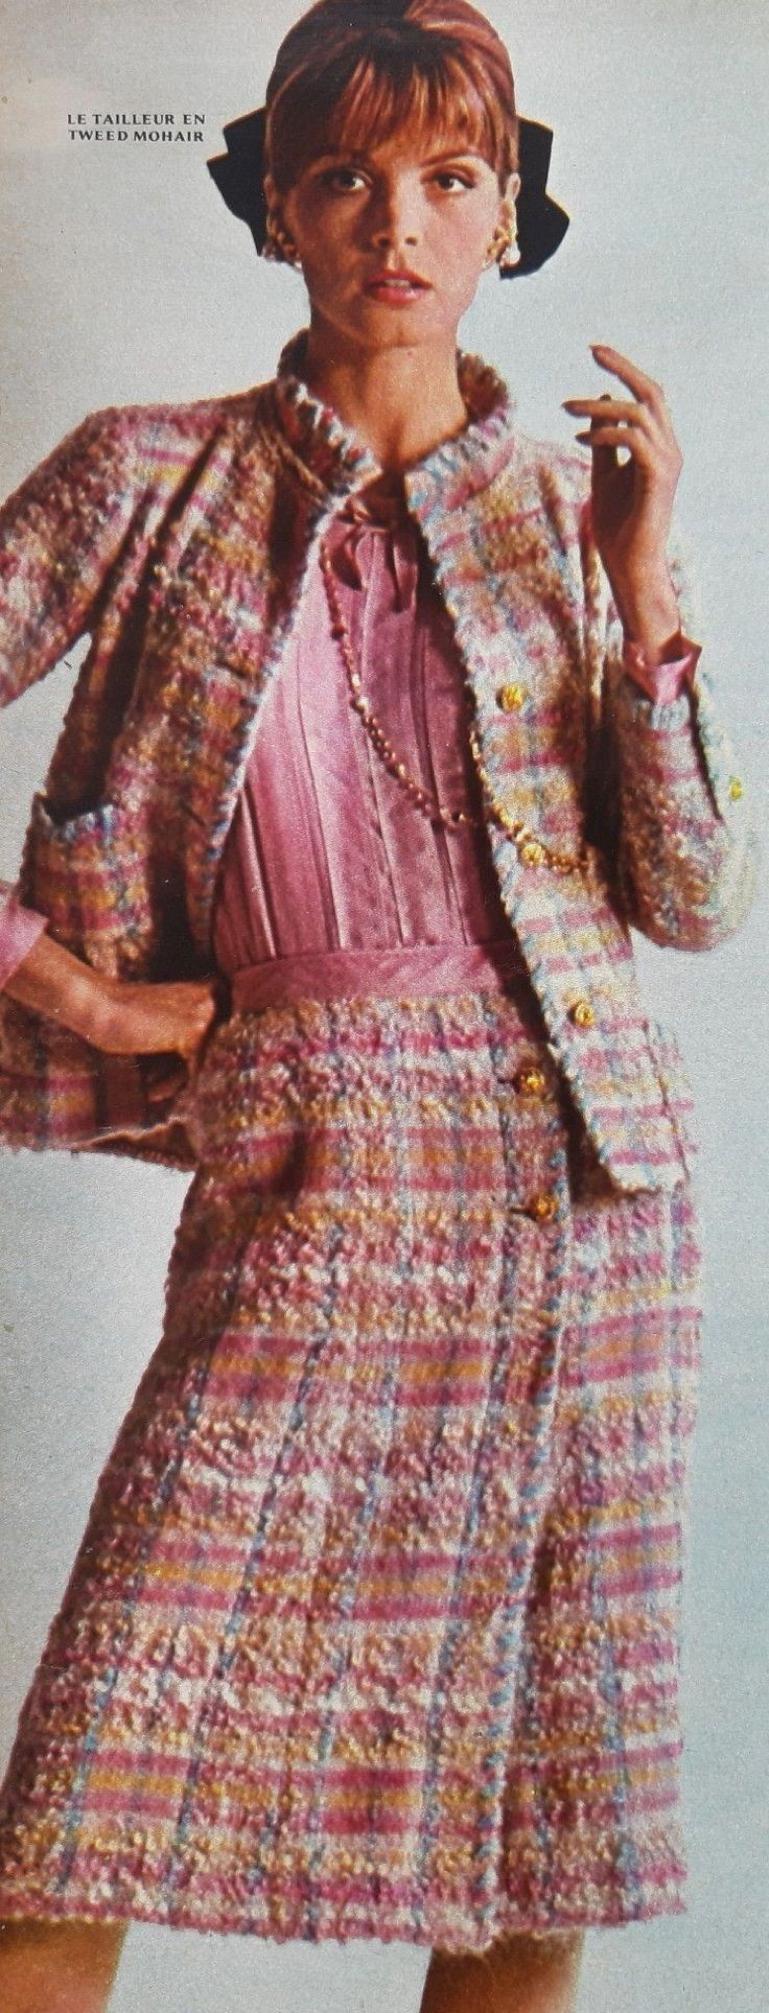 Off-white tweed and pale silk jacket and dress ensemble Chanel 1964  11